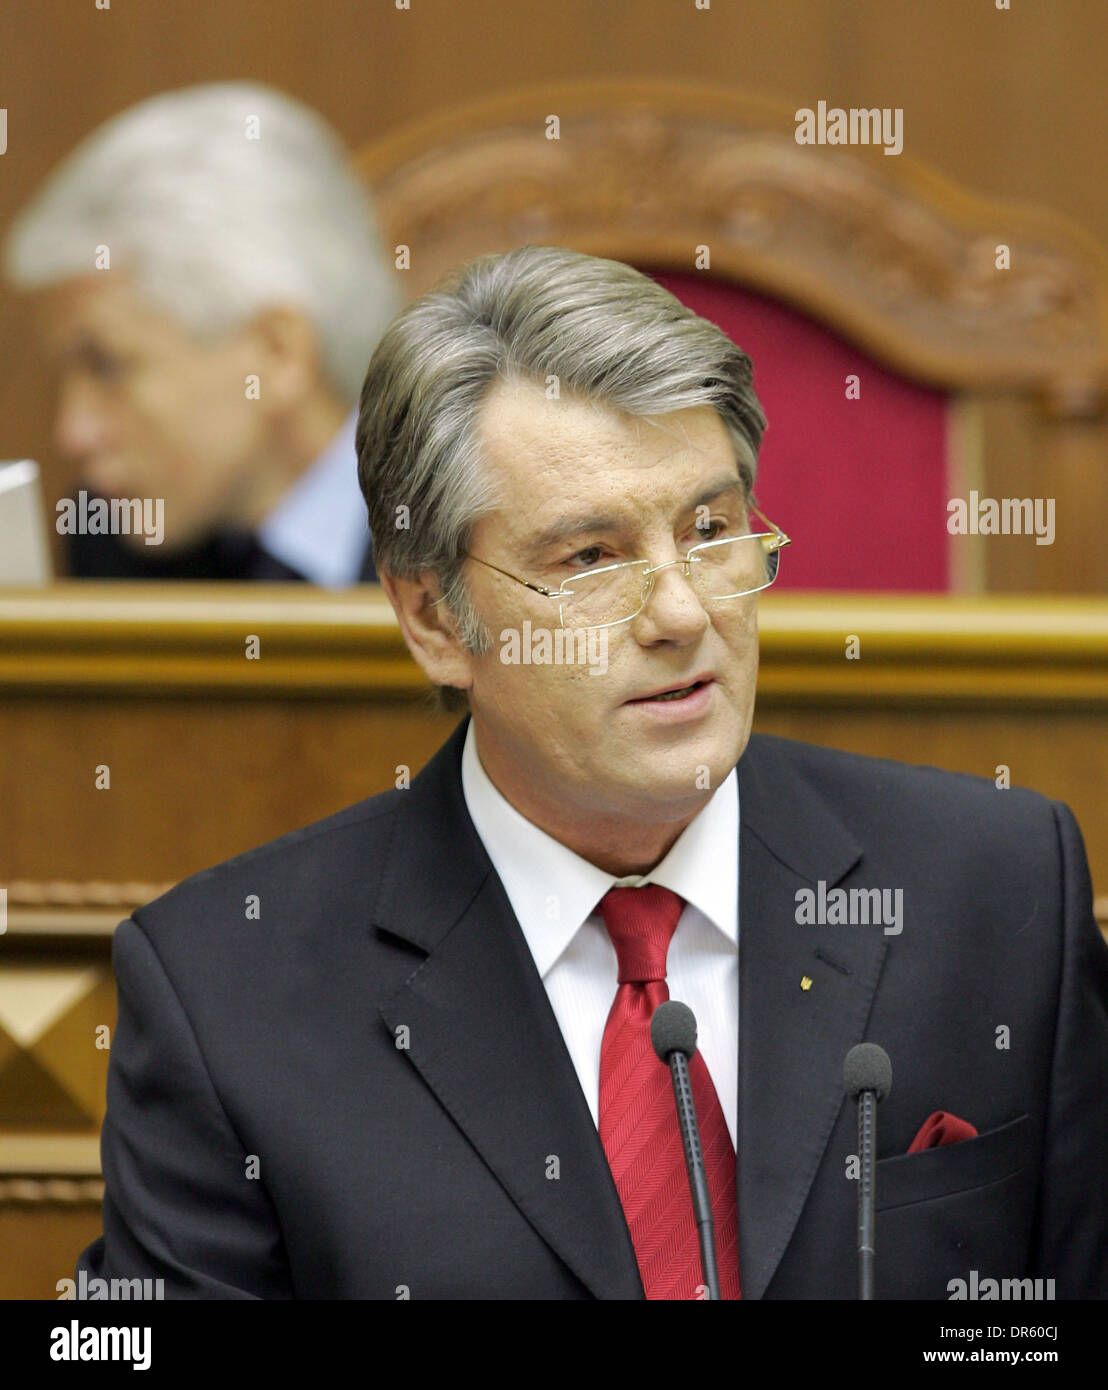 Mar 31, 2009 - Kiev, Ukraine - Ukrainian President VIKTOR YUSHCHENKO during the annual Presidential address in Parliament. (Credit Image: © PhotoXpress/ZUMA Press) RESTRICTIONS: * North and South America Rights Only * Stock Photo